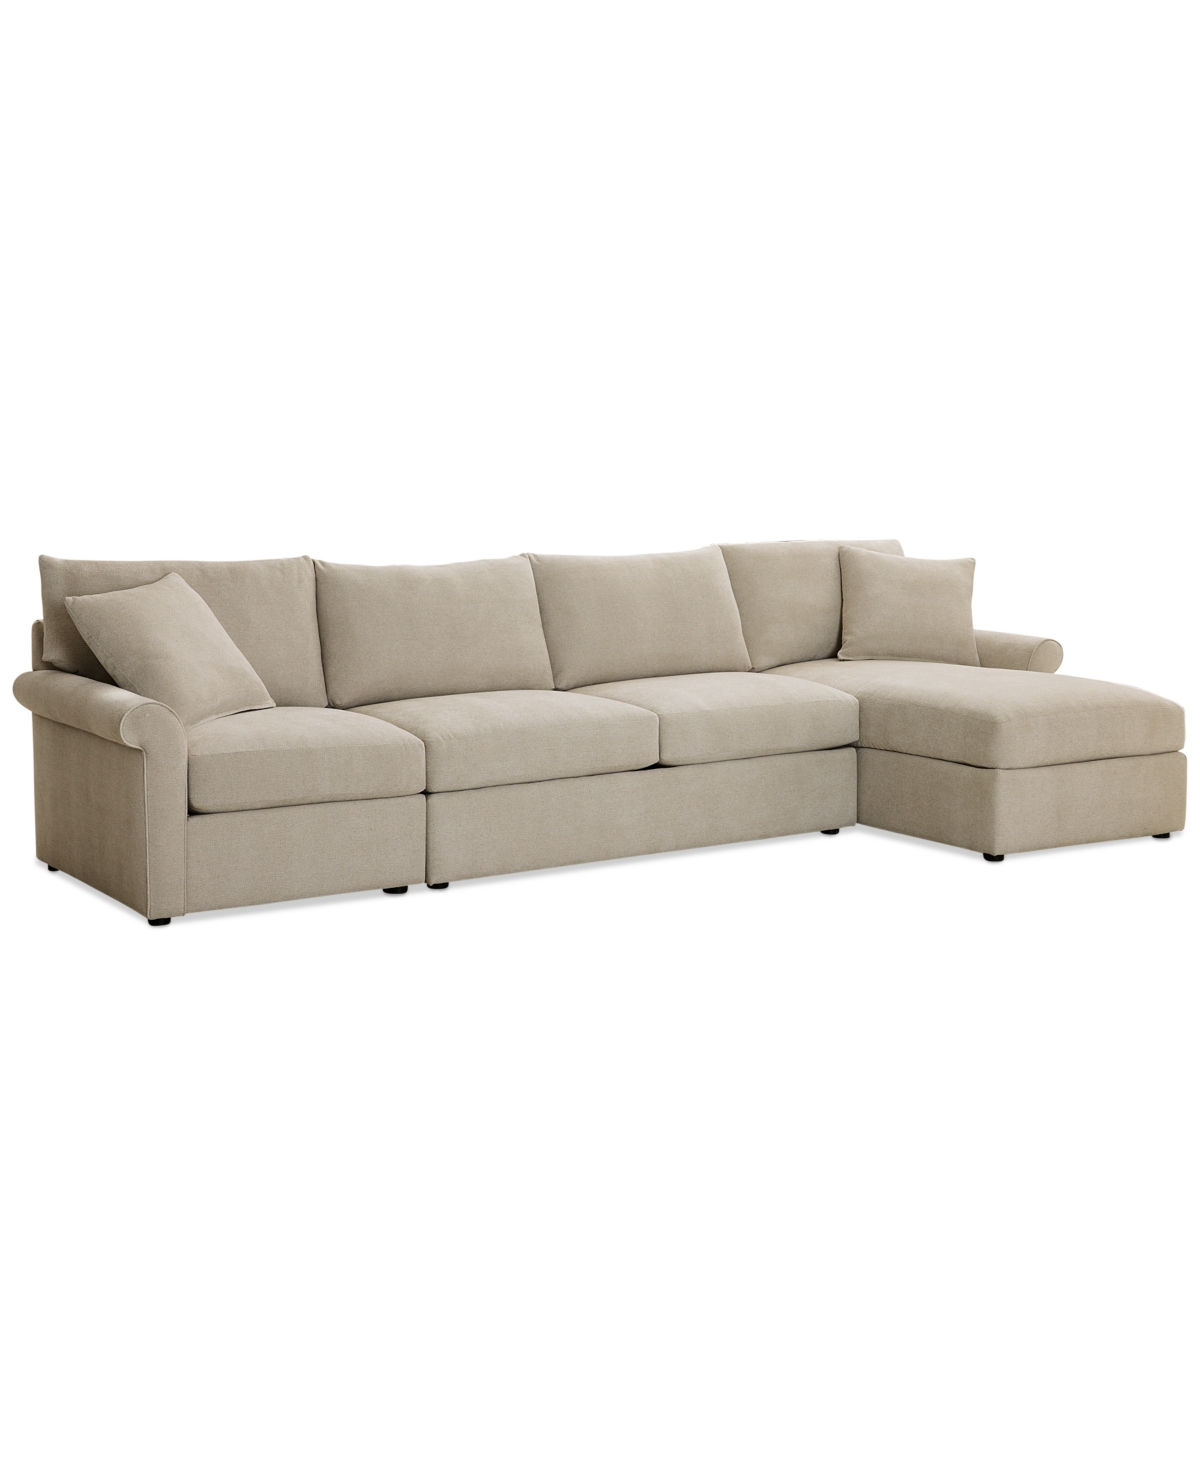 Furniture Wrenley 134" 3-pc. Fabric Sectional Chaise Sofa, Created For Macy's In Dove